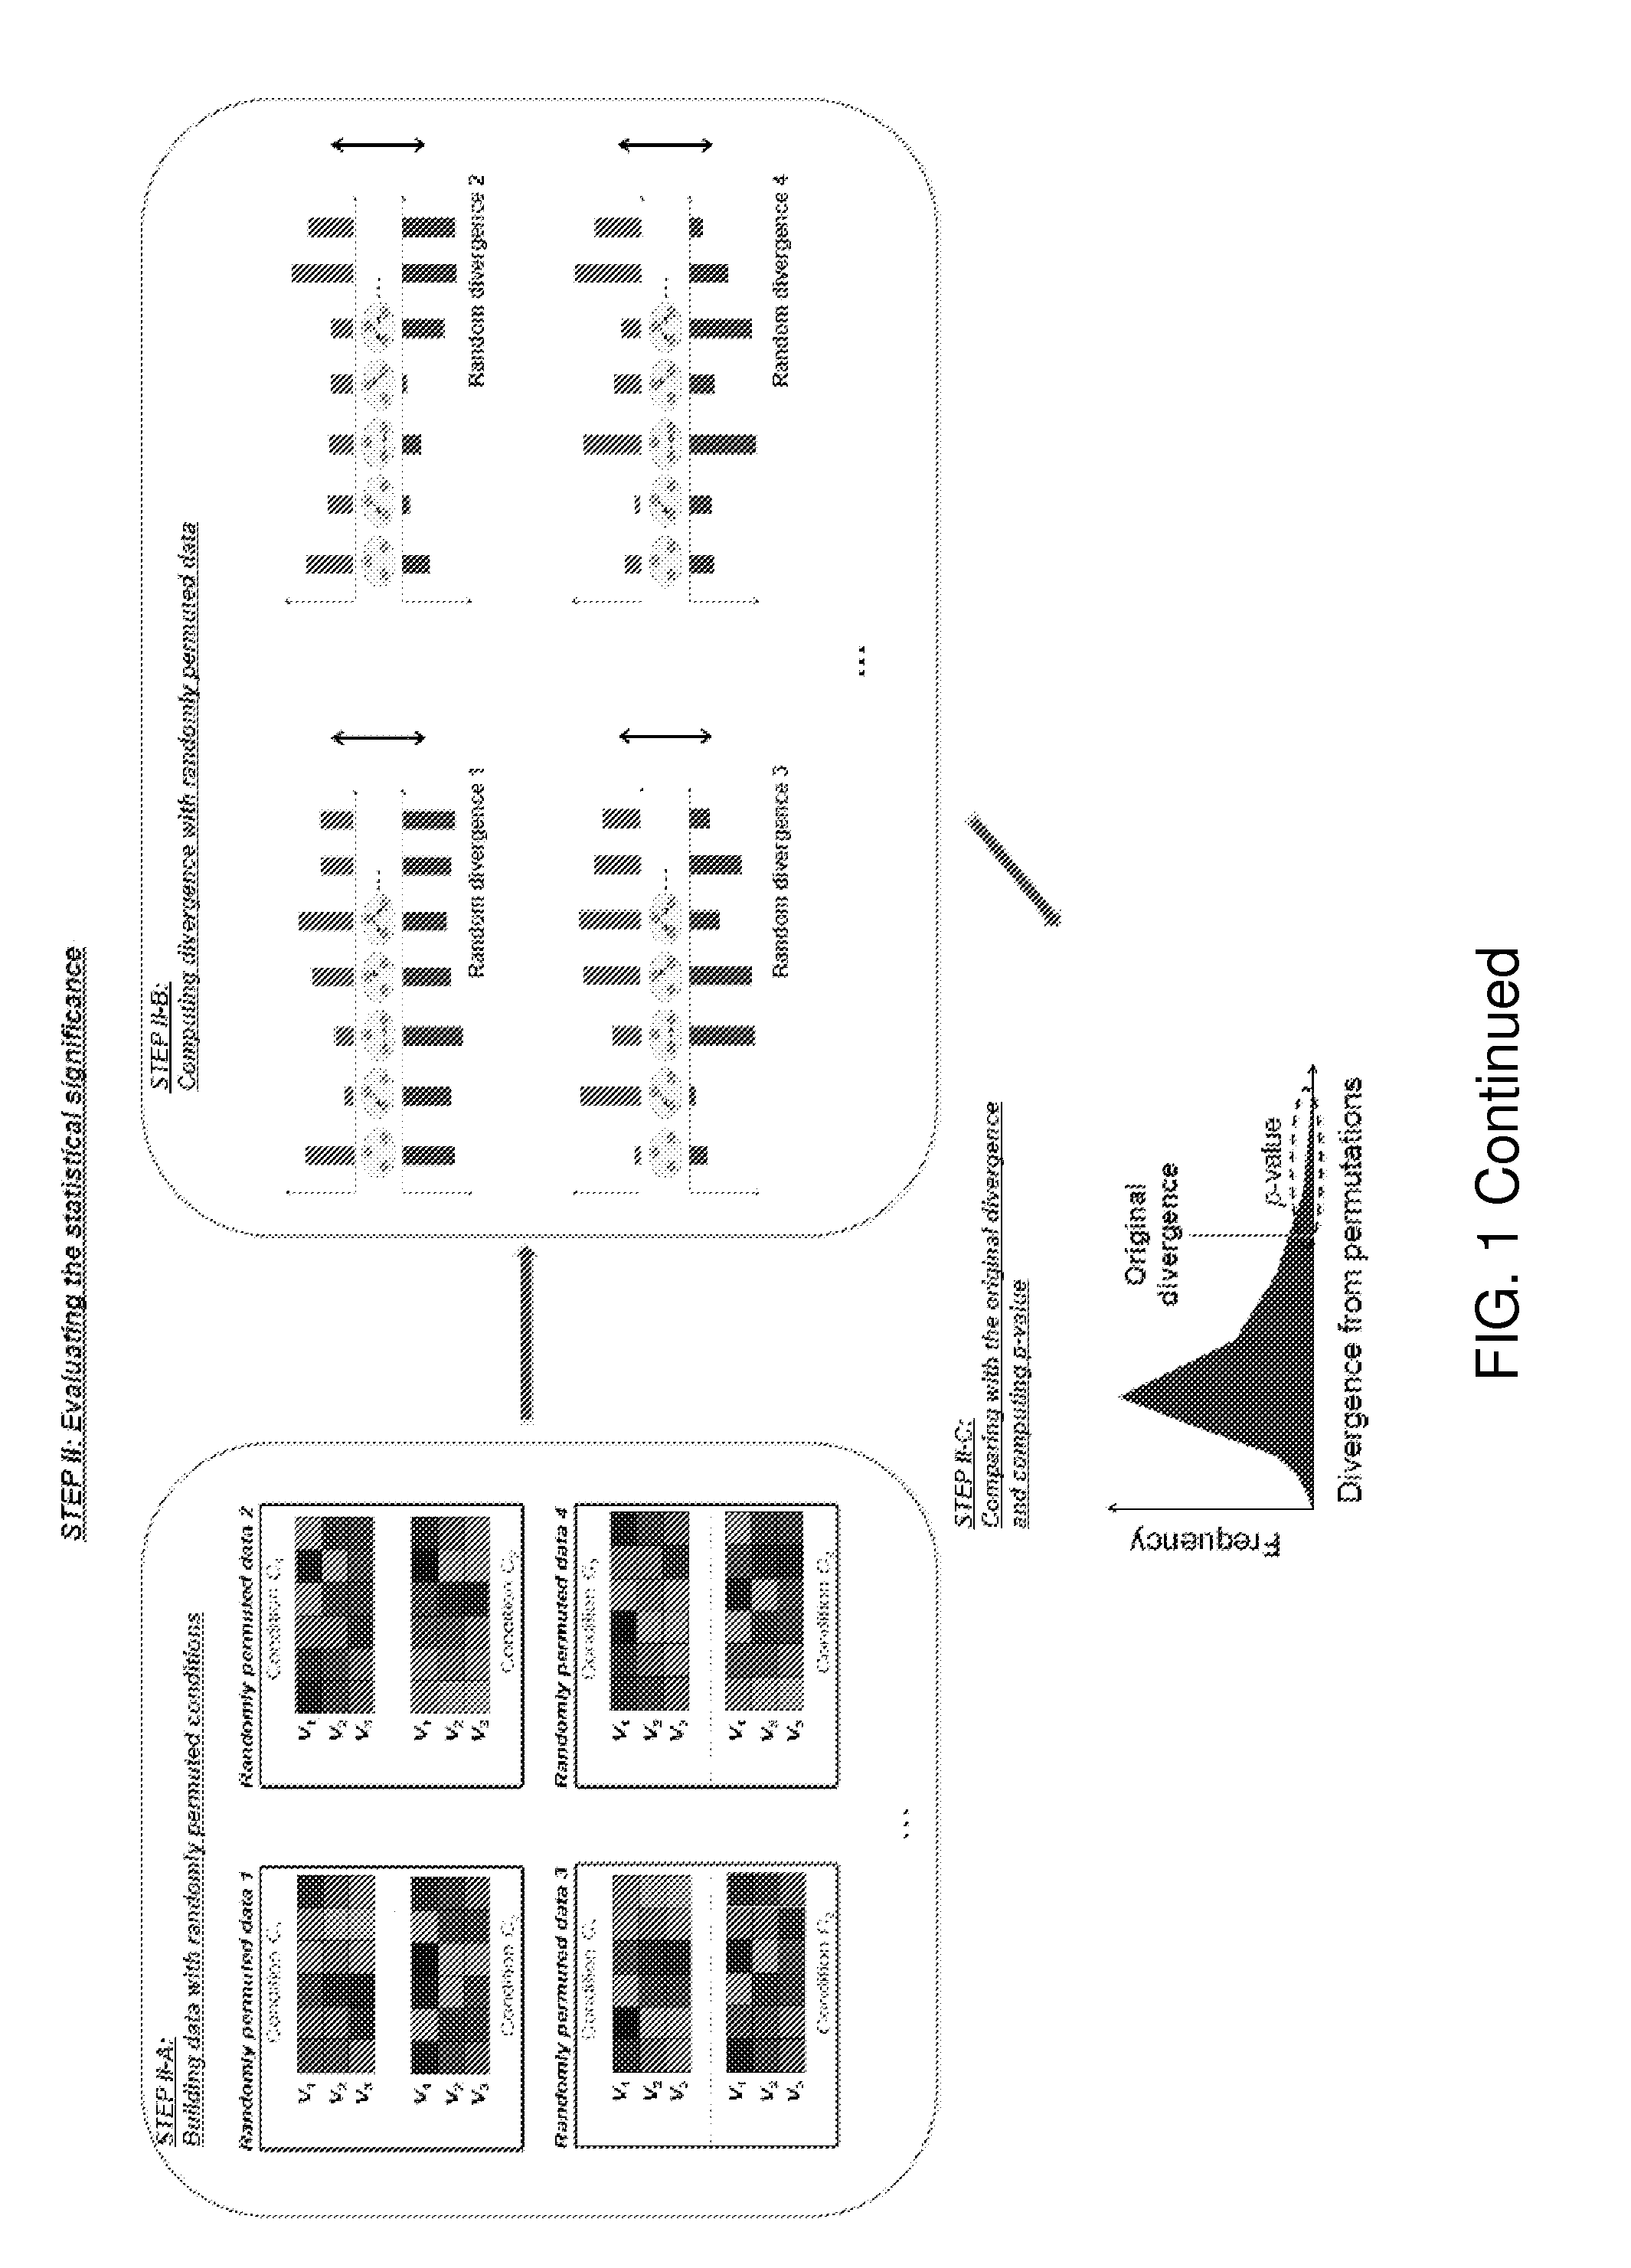 Systems and methods for identifying the relationships between a plurality of genes